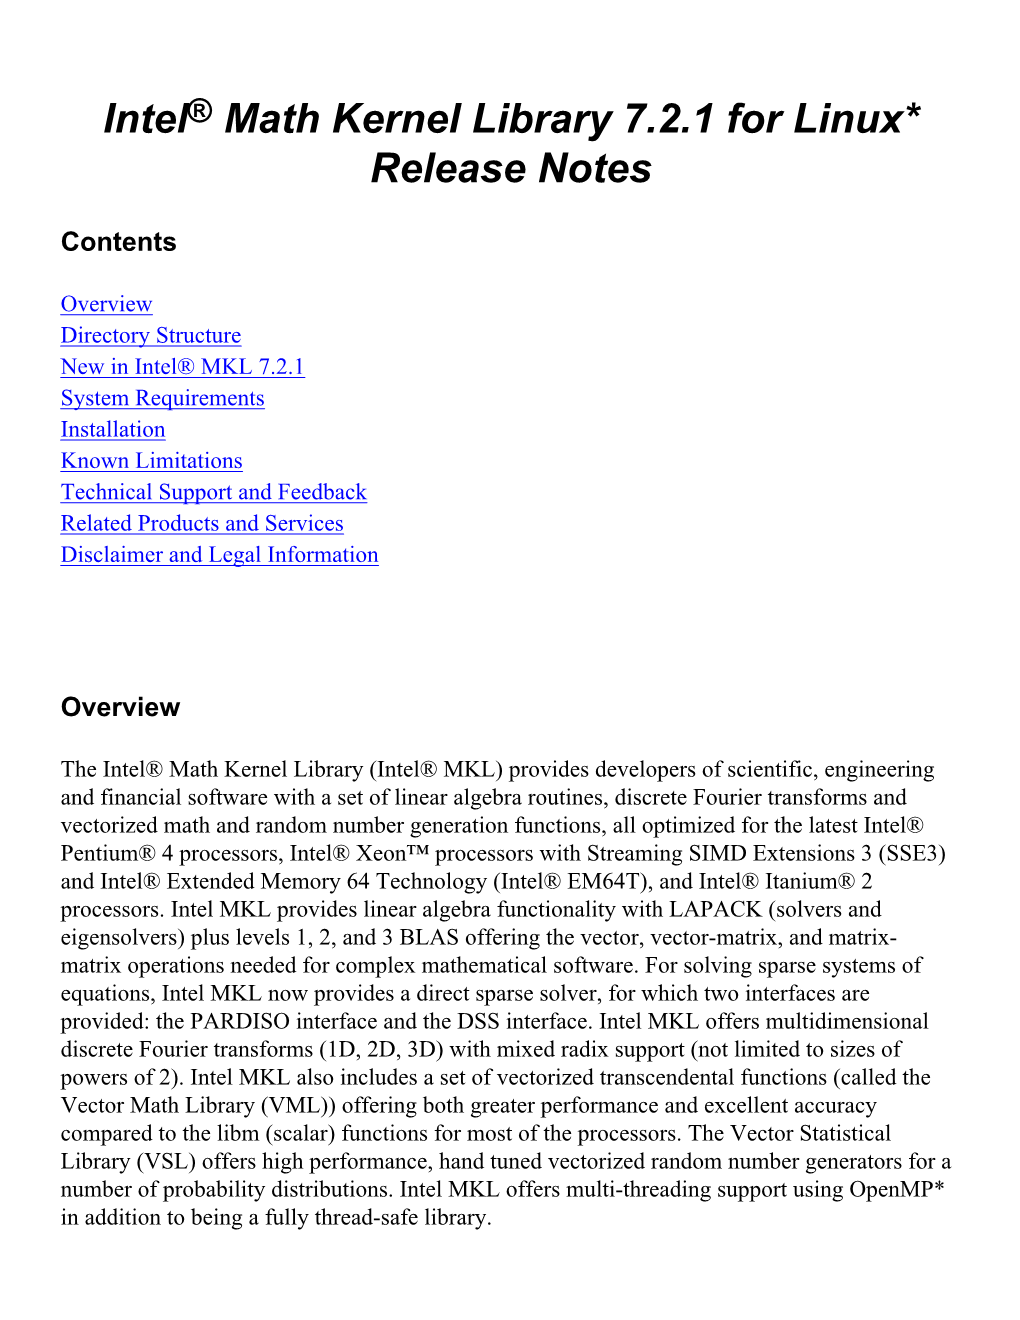 Intel® Math Kernel Library 7.2.1 for Linux* Release Notes